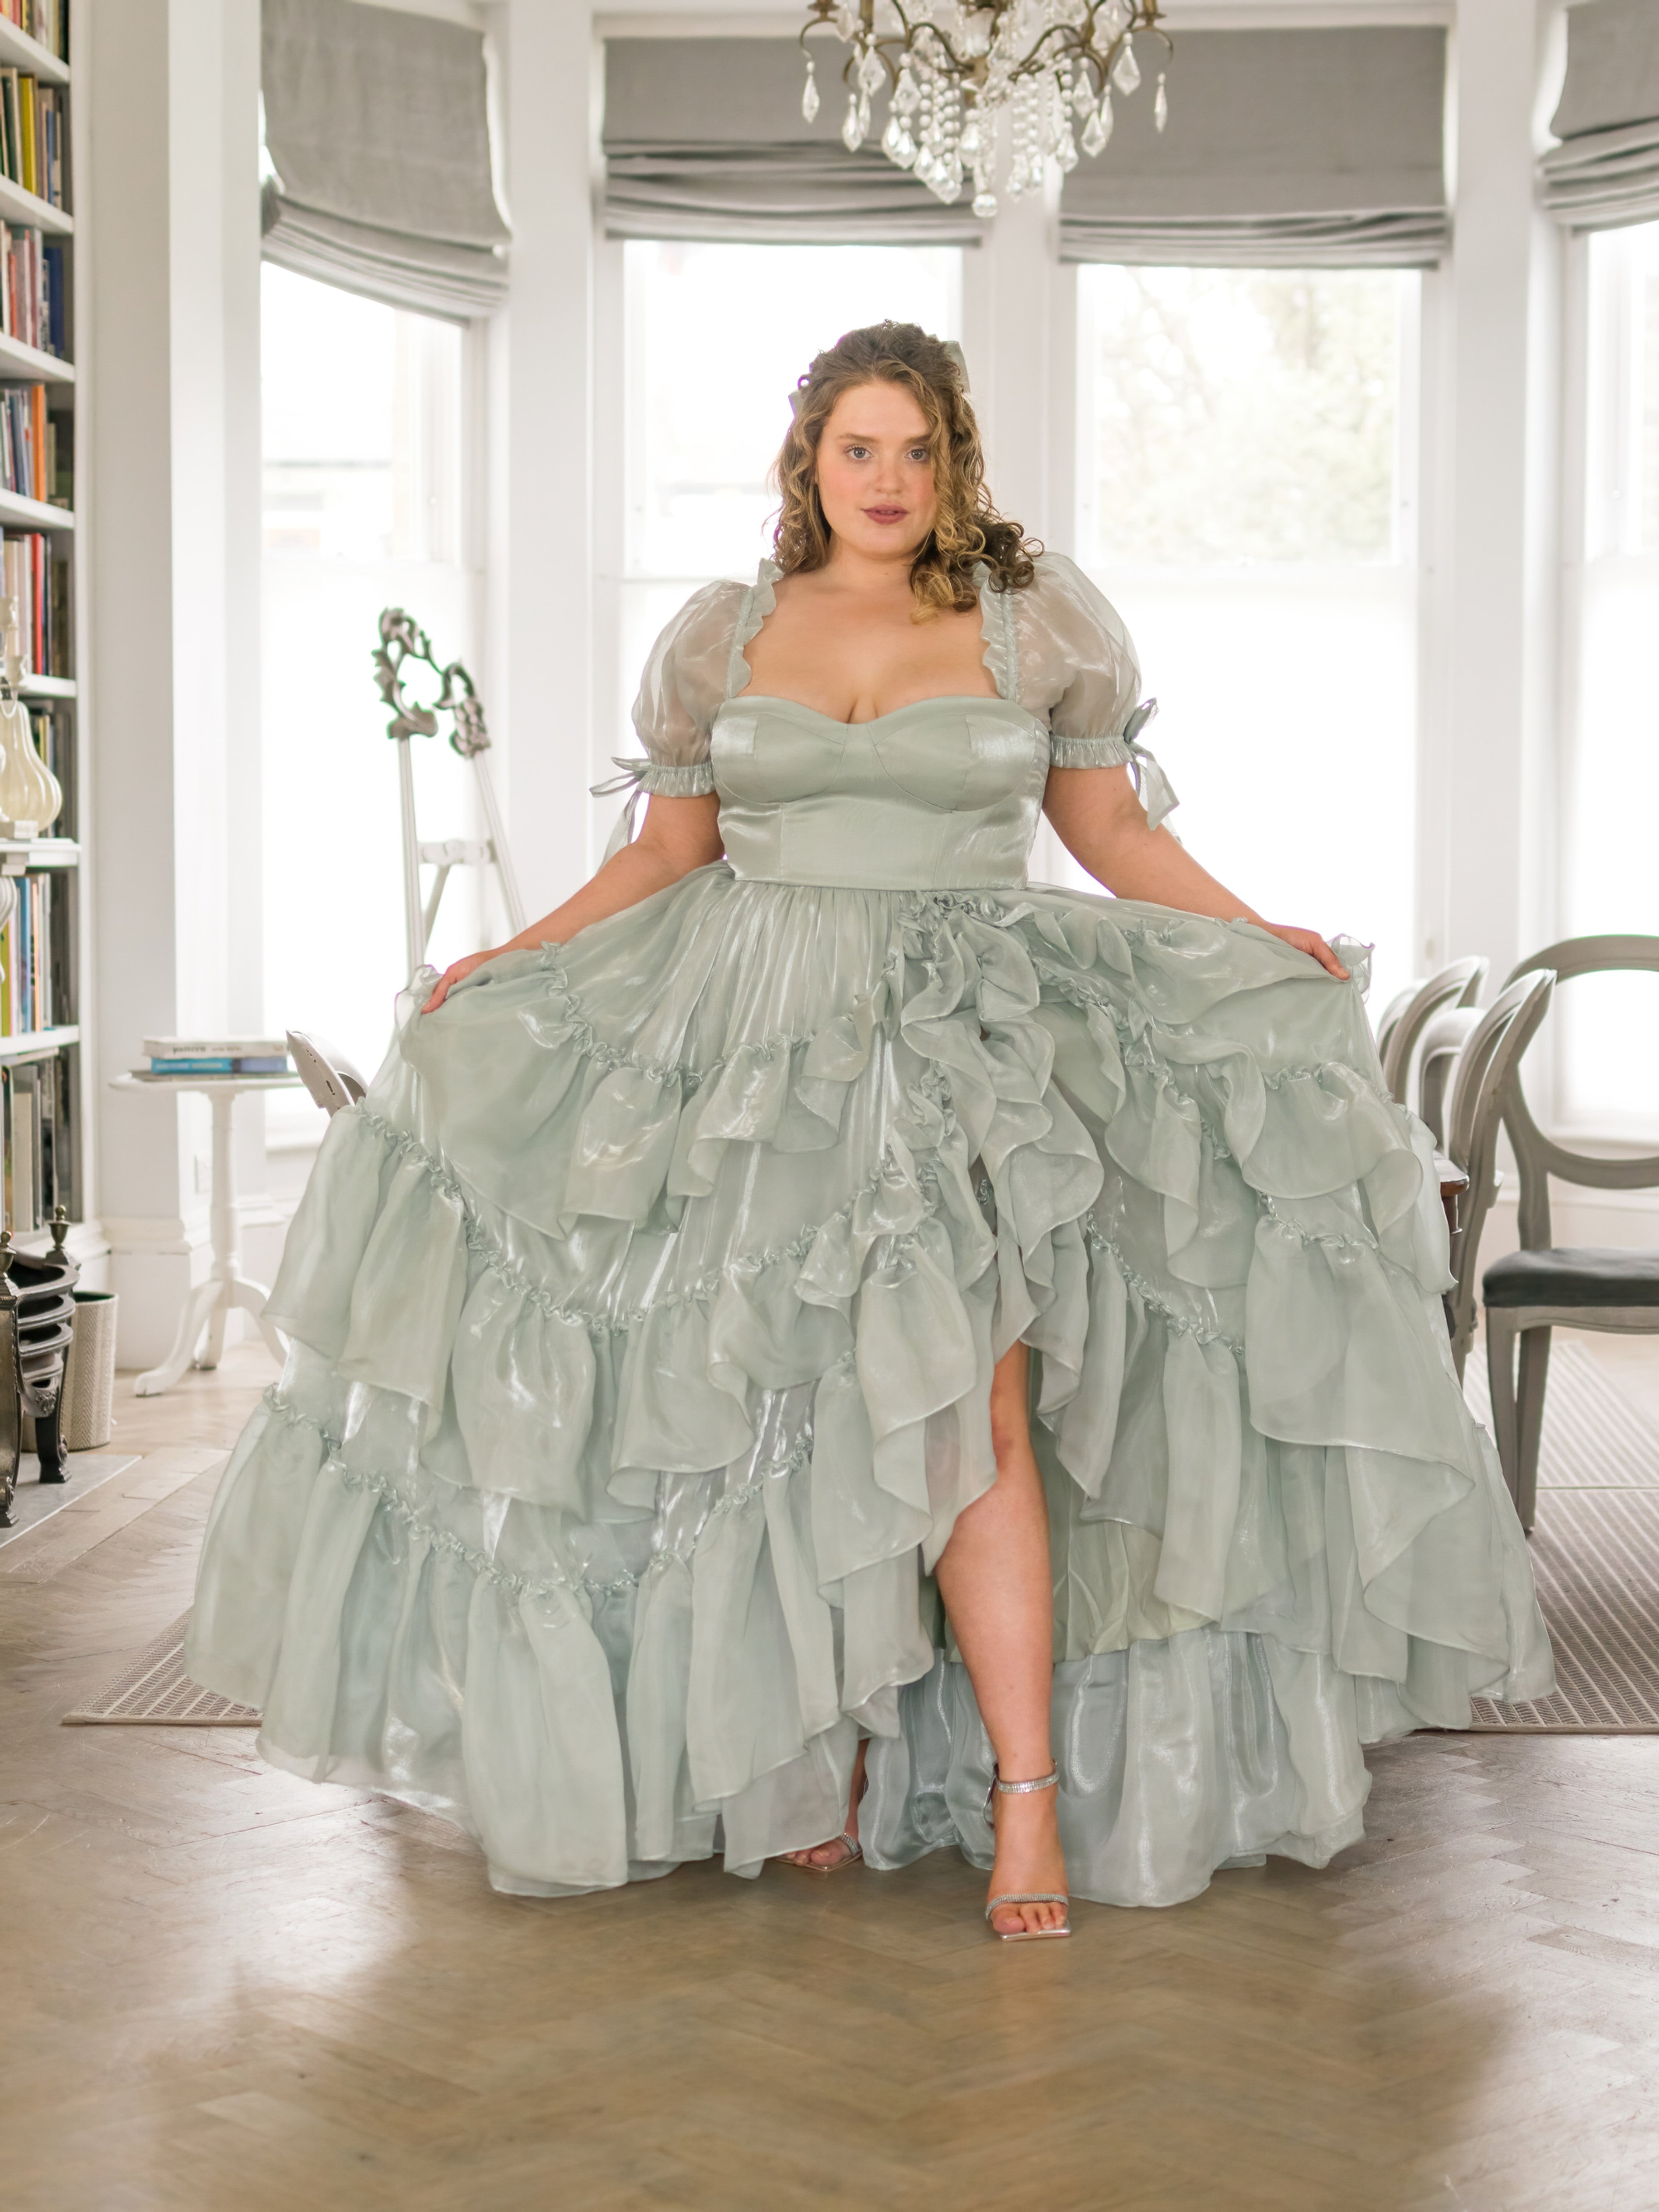 Heart of Glass Mademoiselle Gown